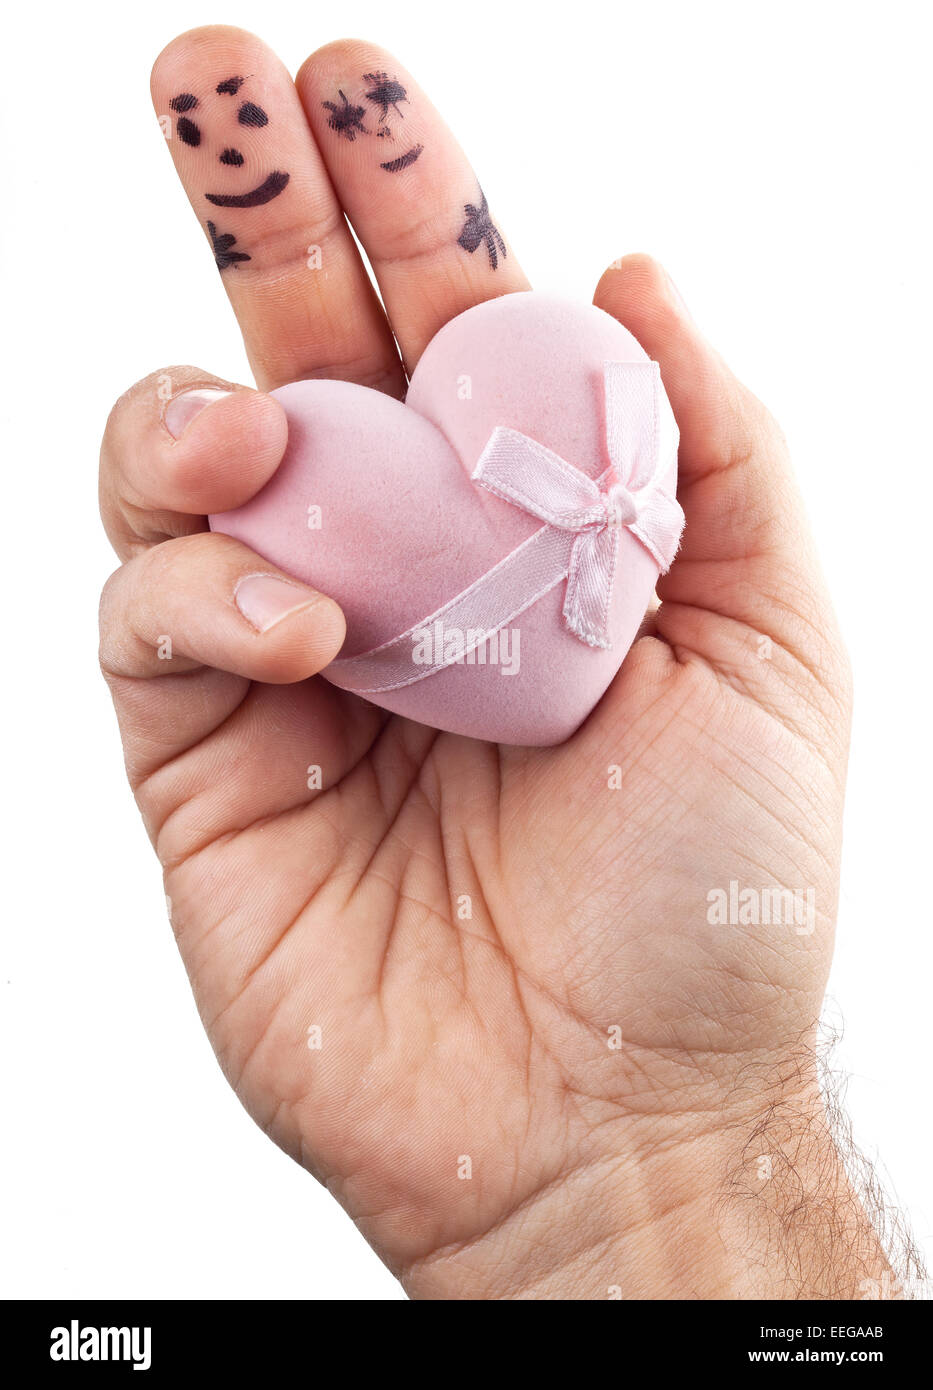 Couple painted on man's fingers and gift box in the form of heart. Stock Photo